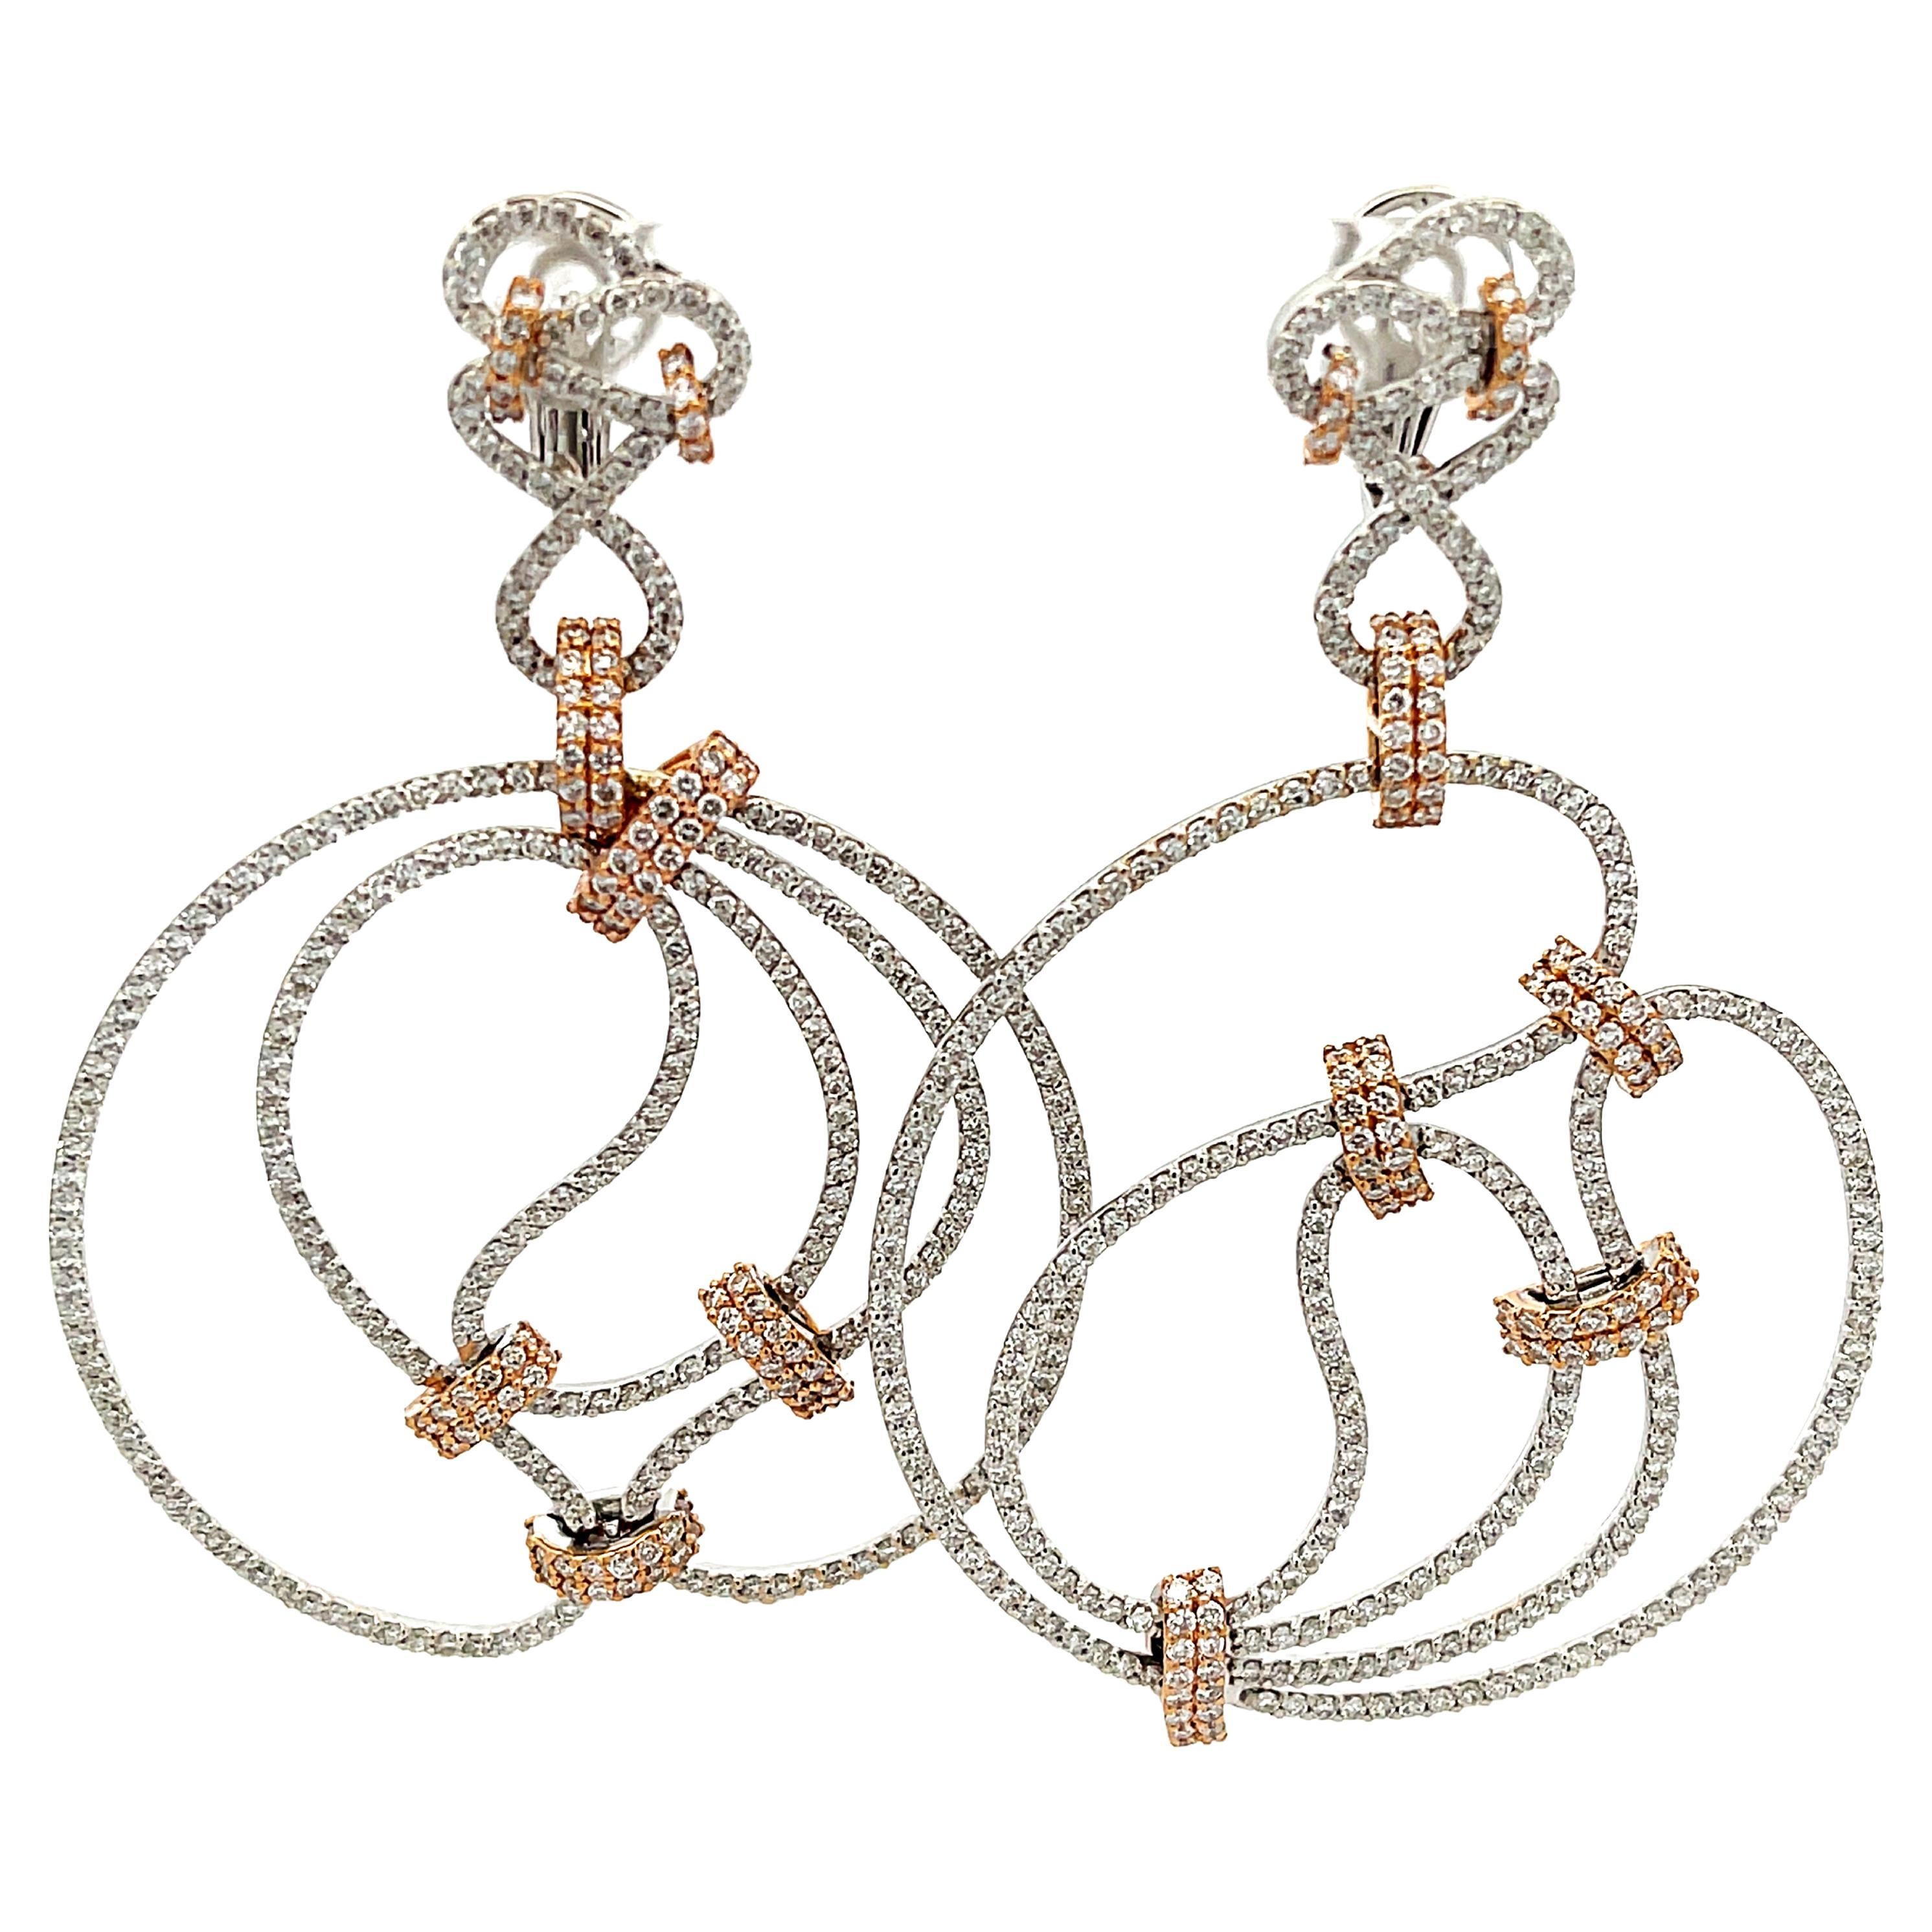 6.74 Carat Large Diamond Earrings in 18k White Gold with Rose Gold Accents For Sale